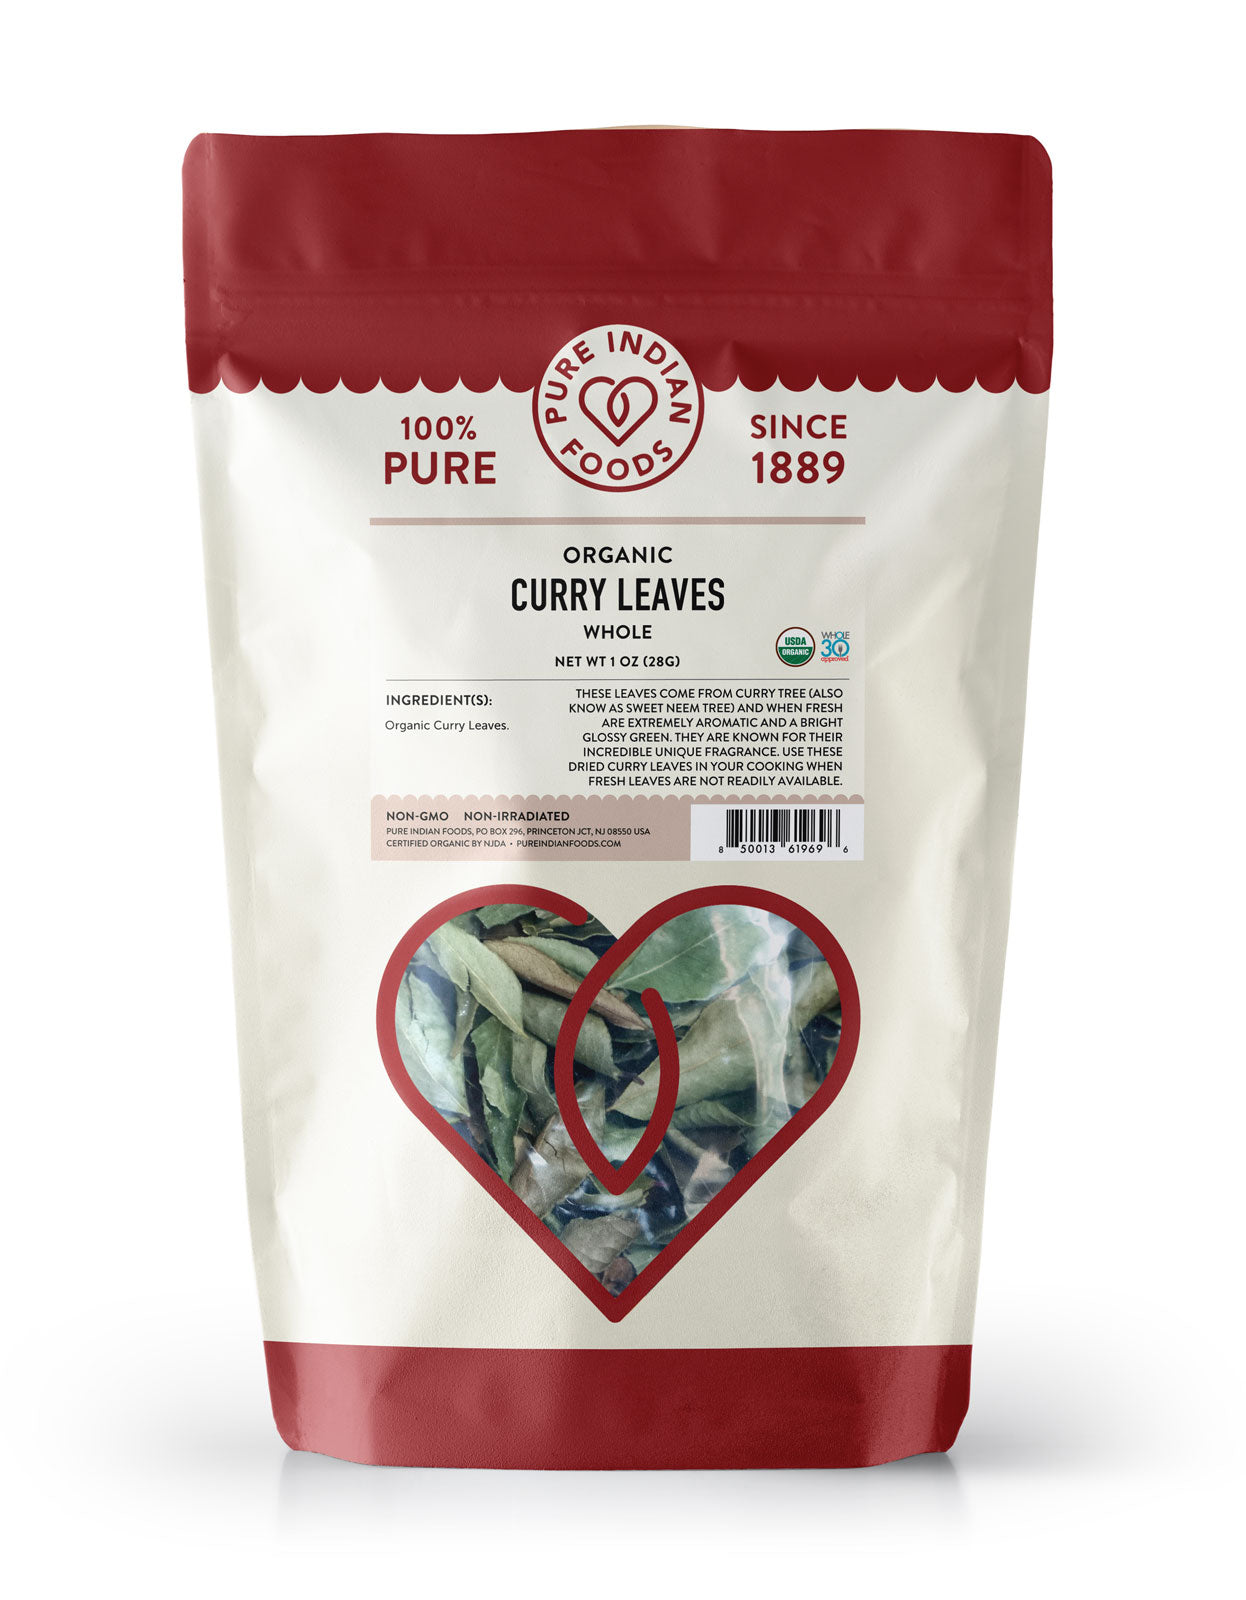 Organic Curry Leaves from Pure Indian Foods